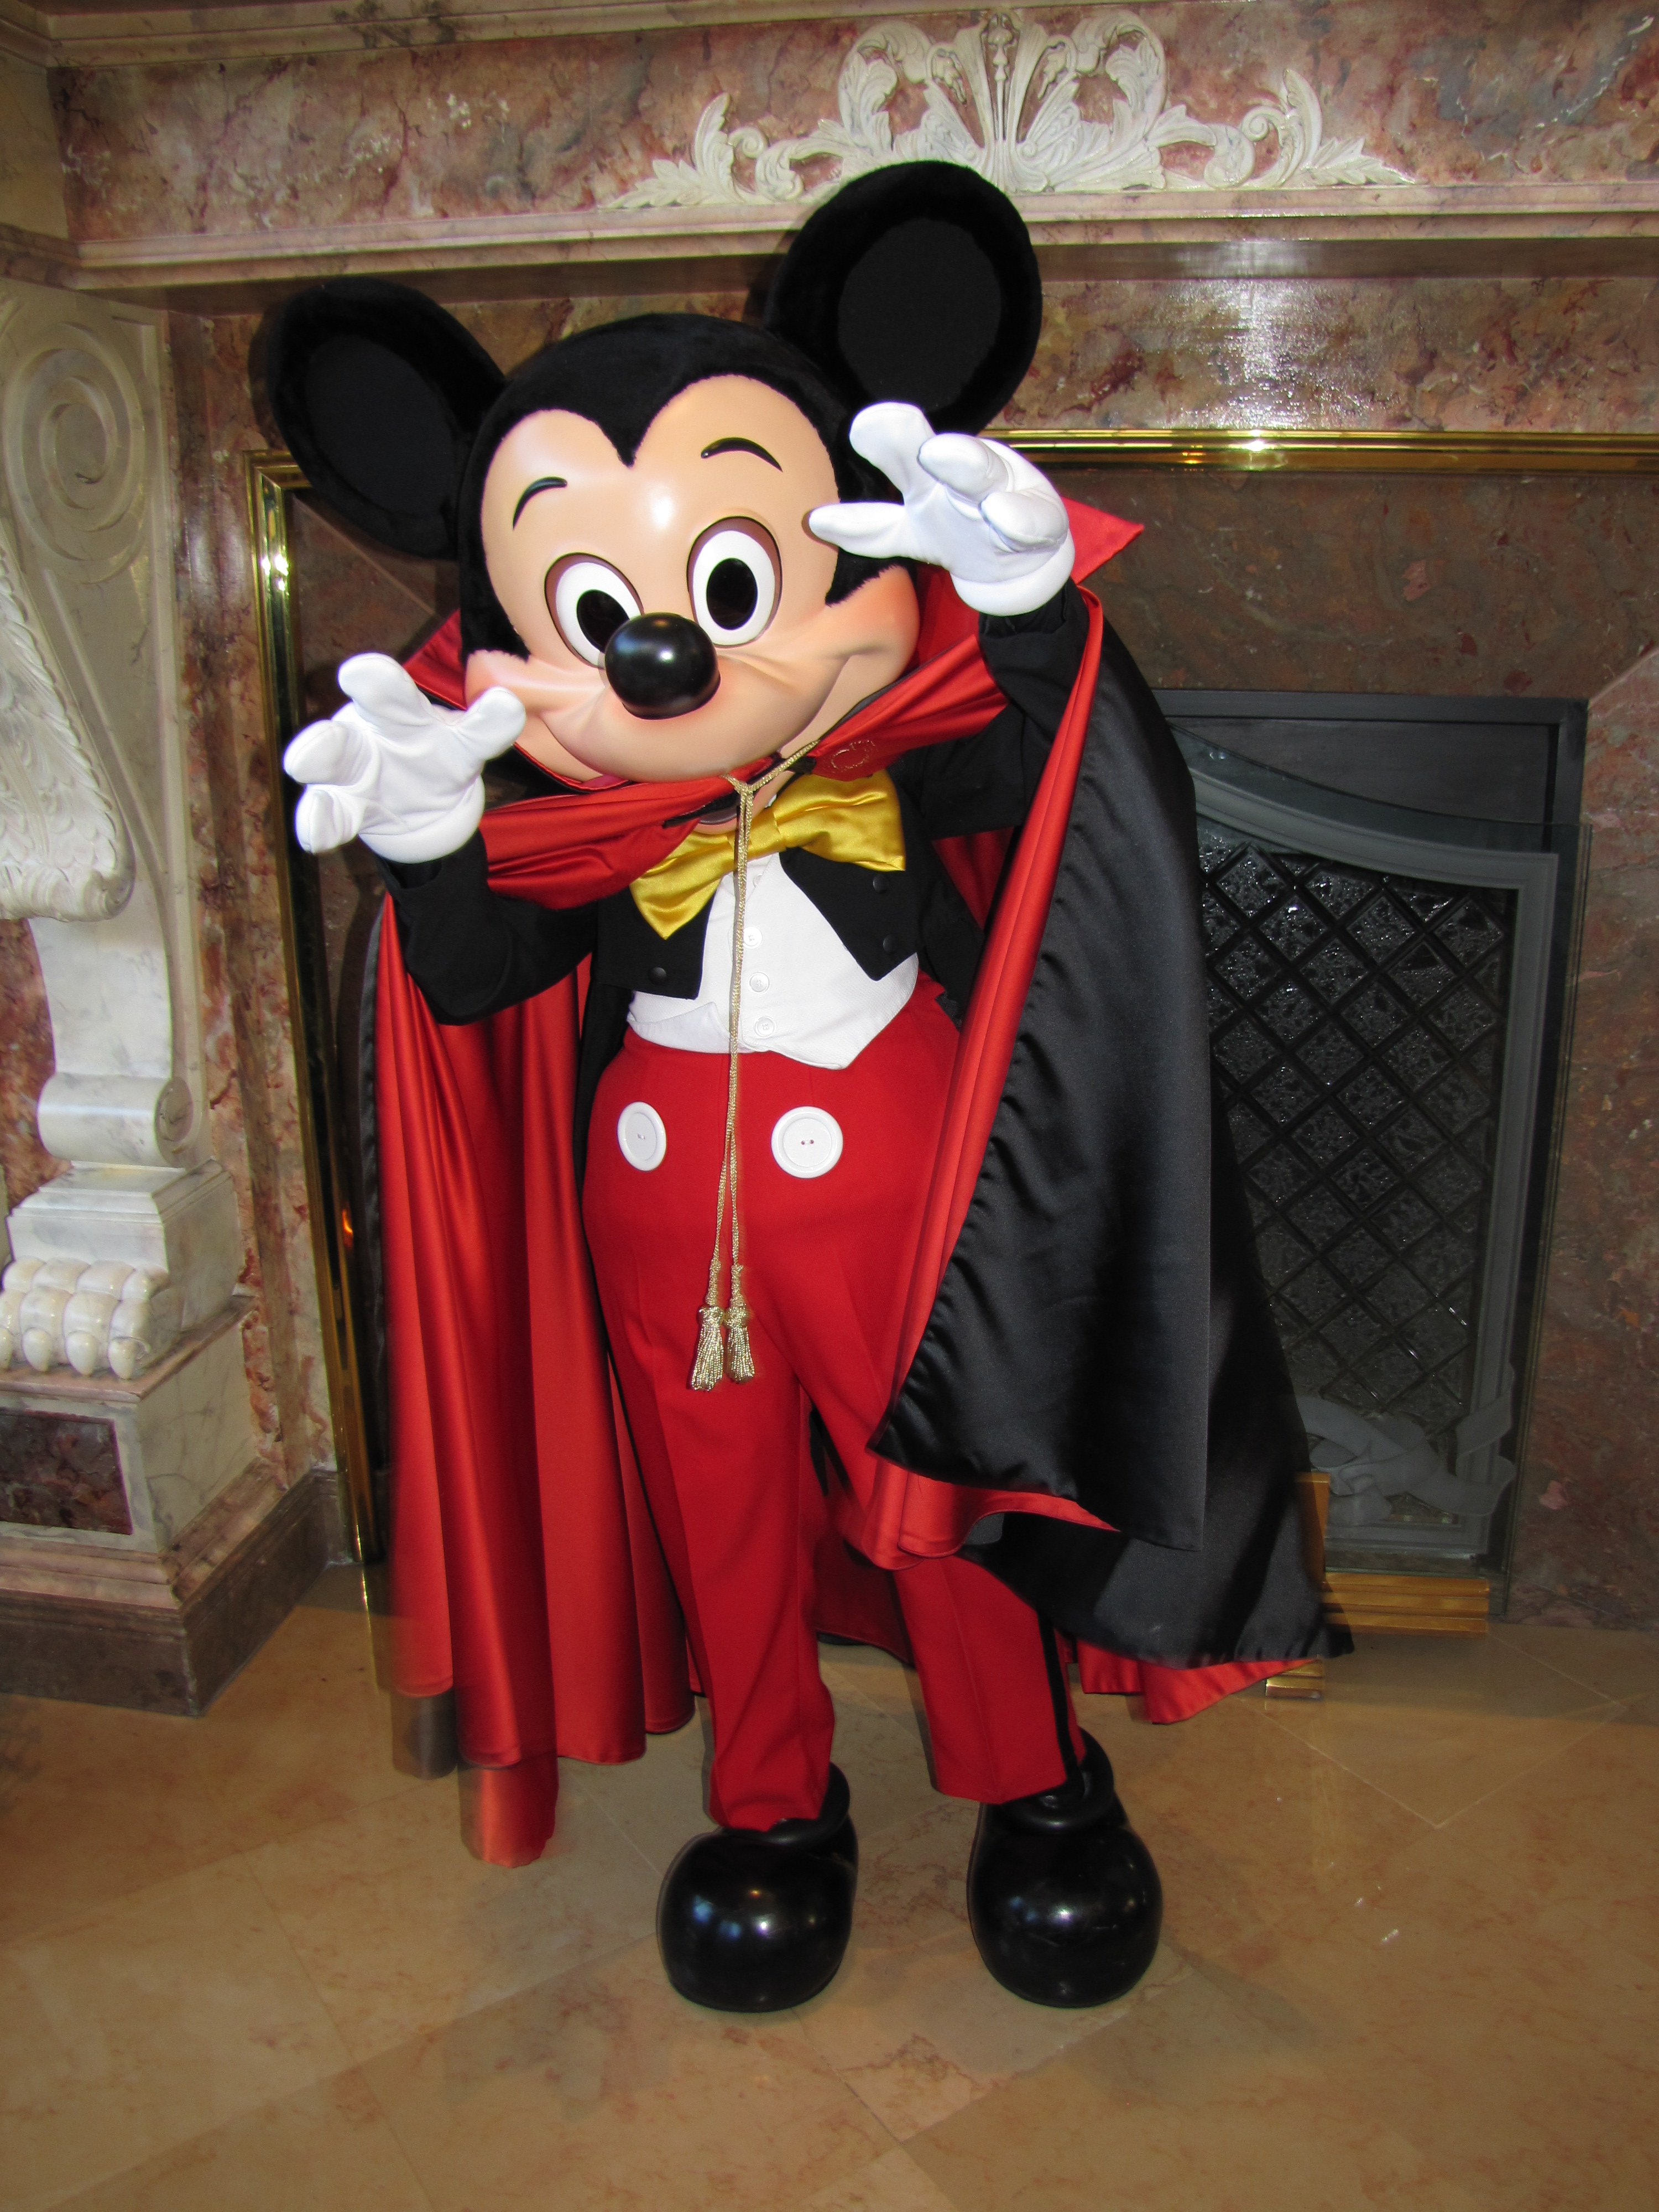 Before Mickey received his purple Halloween outfit he wore this Dracula outfit, nowadays you can only meet him in this outfit at the Resort Hotels if you are lucky.